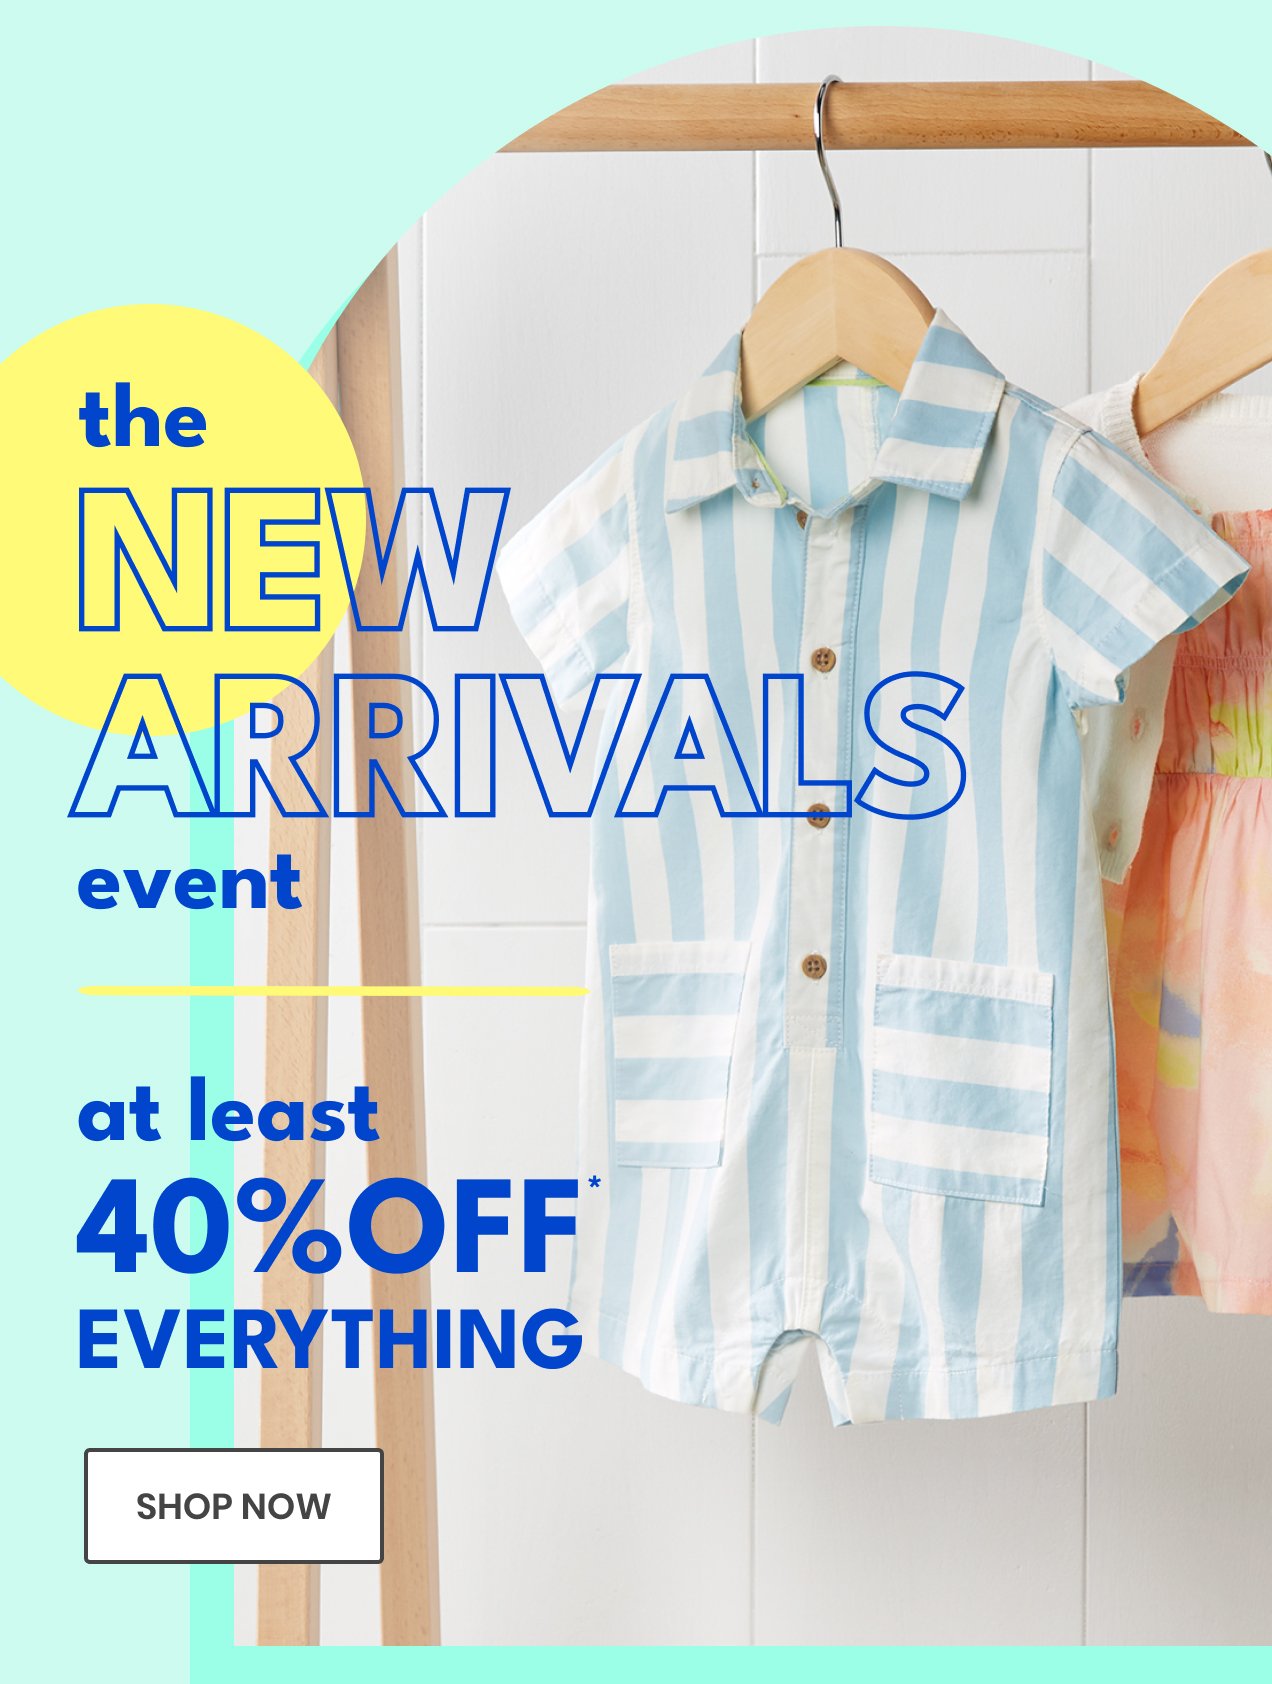 the NEW ARRIVALS event | at least 40% OFF* EVERYTHING | SHOP NOW